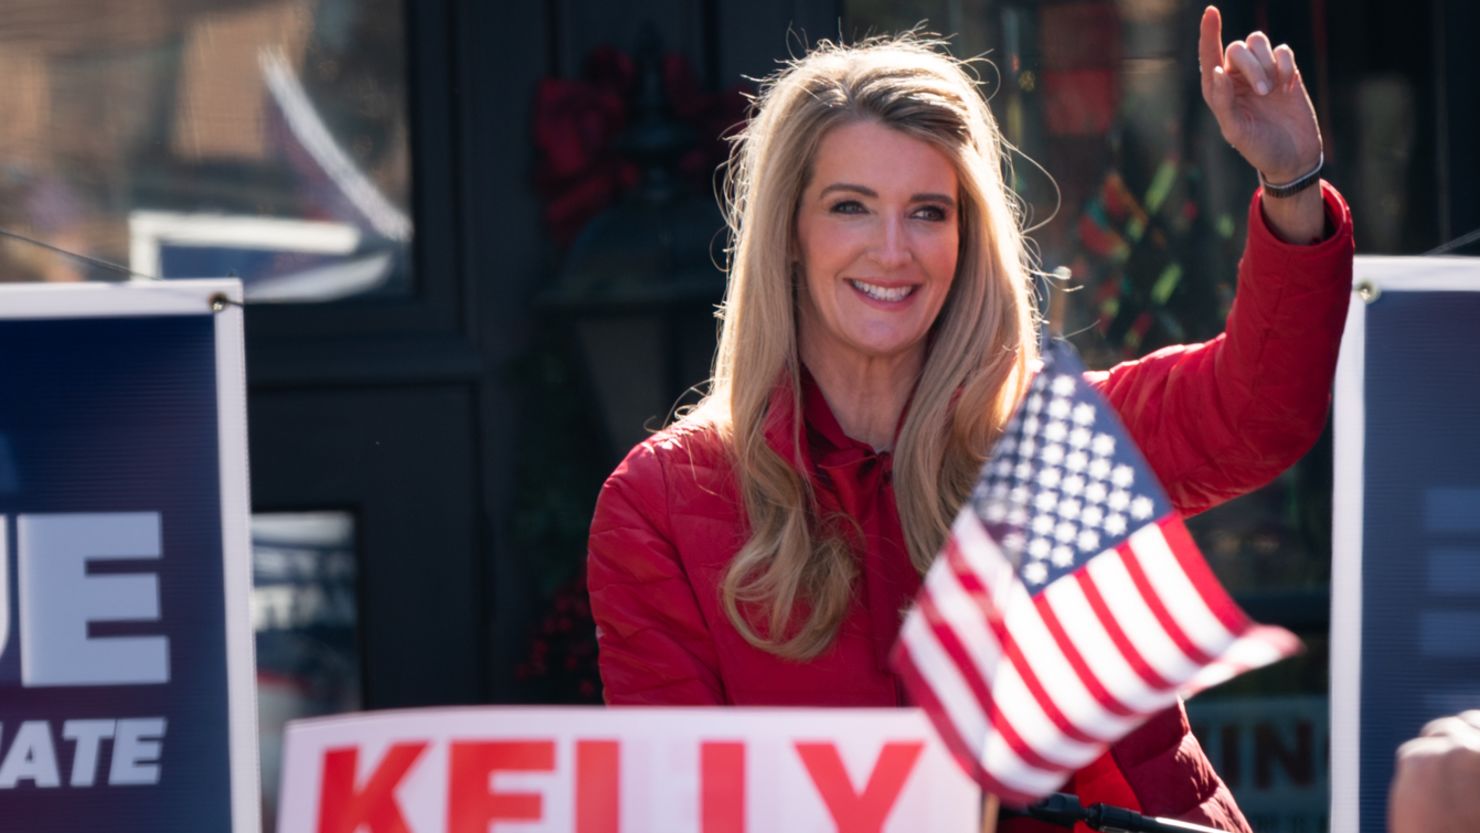 Then-Sen. Kelly Loeffler of Georgia speaks at a campaign event attended by Ivanka Trump in December in Milton, Georgia. Loeffler lost her seat in a January runoff but is considering running again.